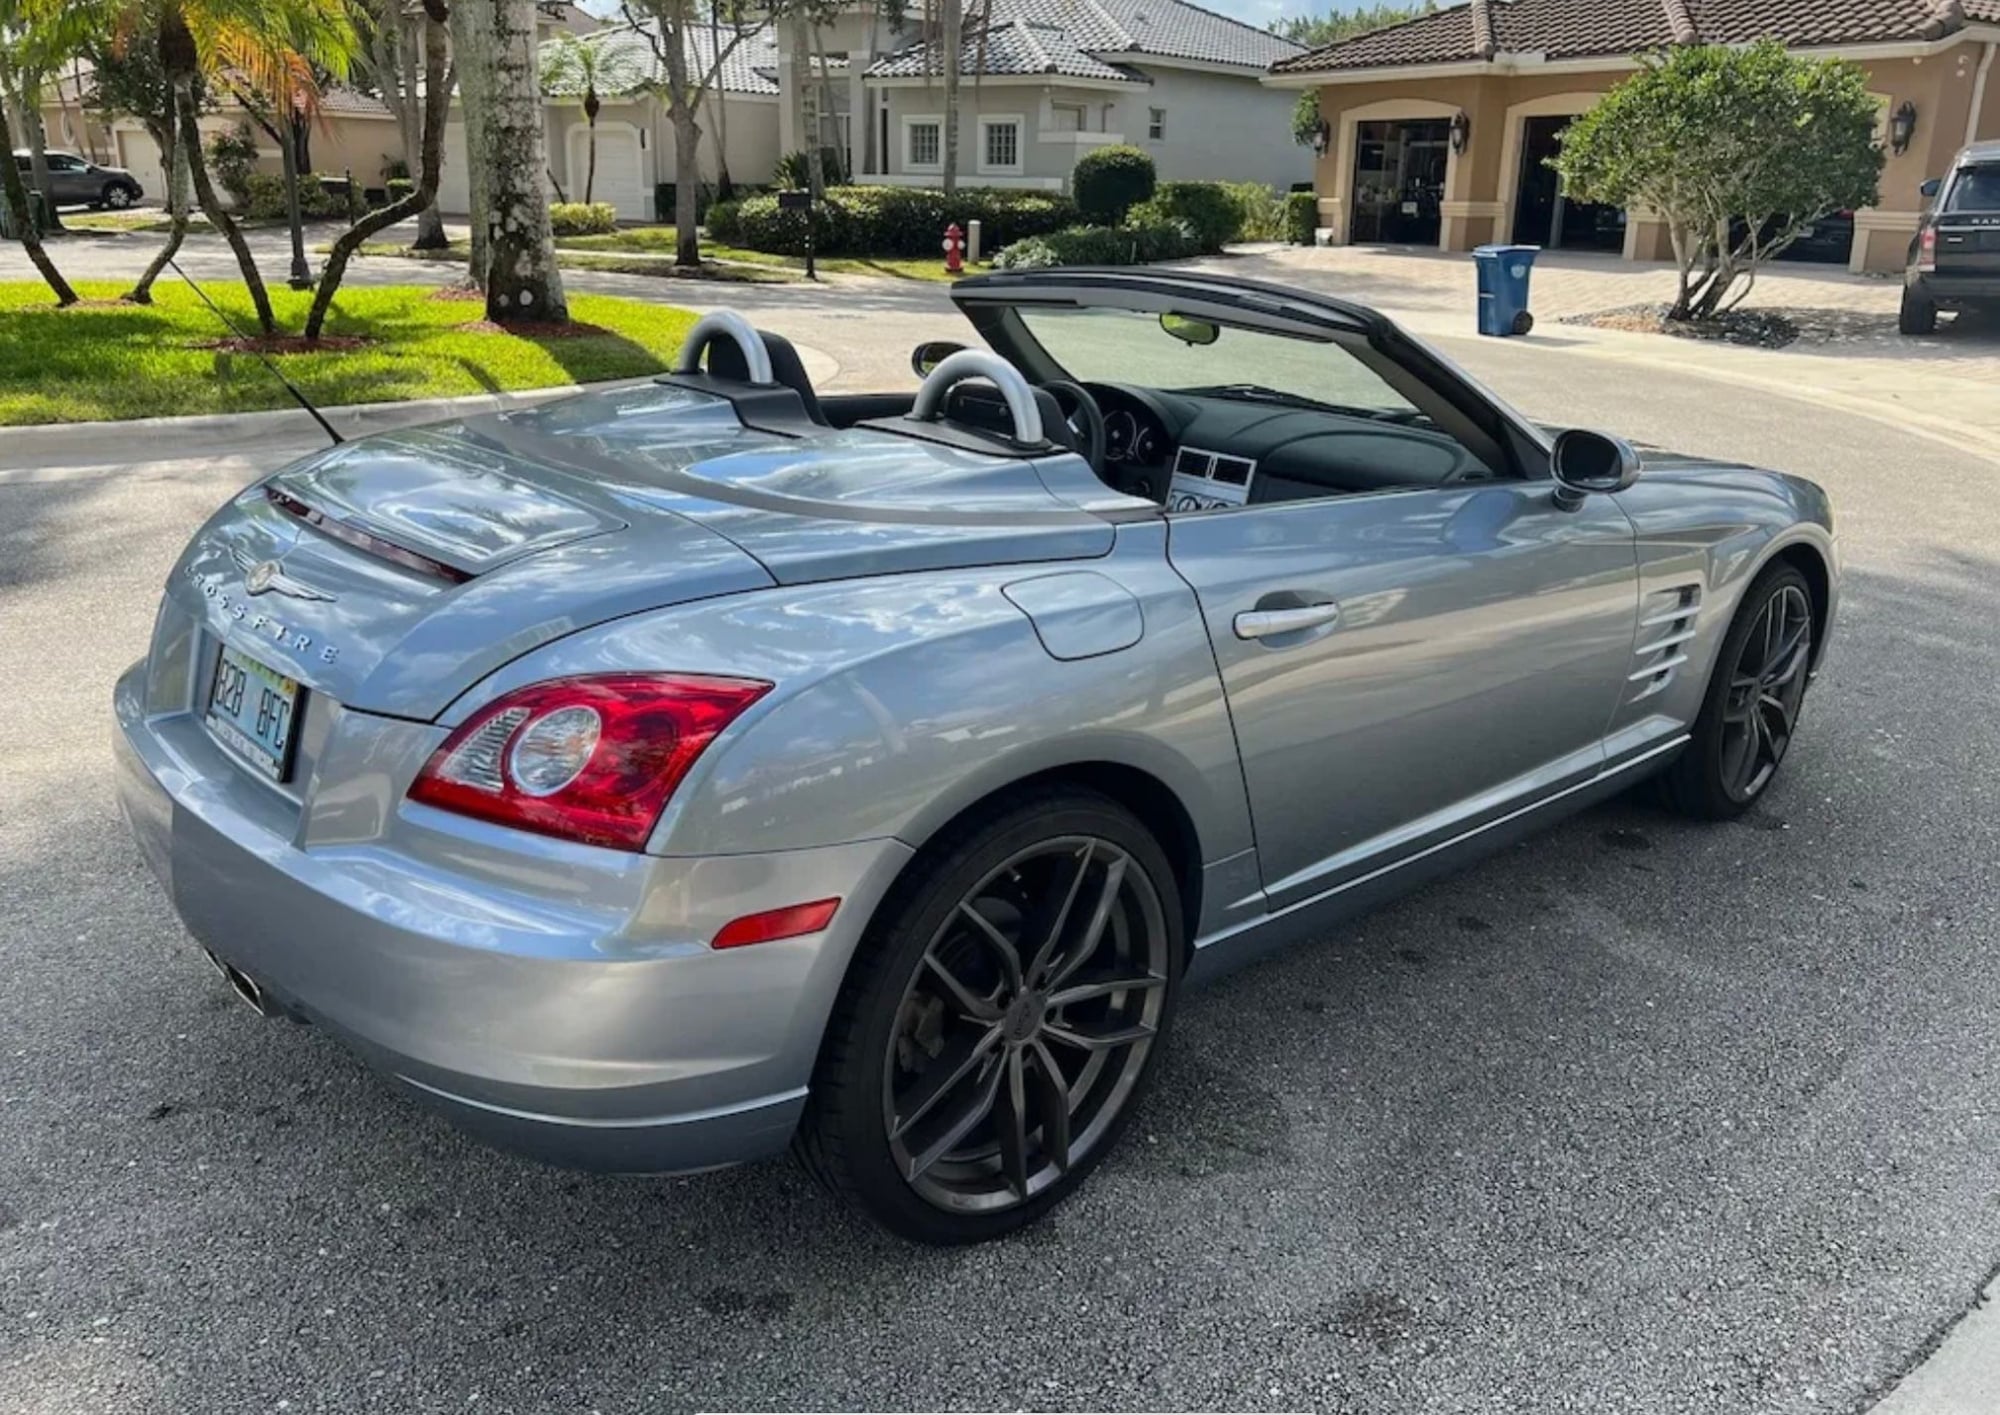 2005 Chrysler Crossfire - 2005 Crossfire Roadster; 10k MILES!!  6-speed manual - Used - VIN VIN 1C3AN65L65X03 - 6 cyl - 2WD - Manual - Convertible - Blue - Bonita Springs, FL 34135, United States